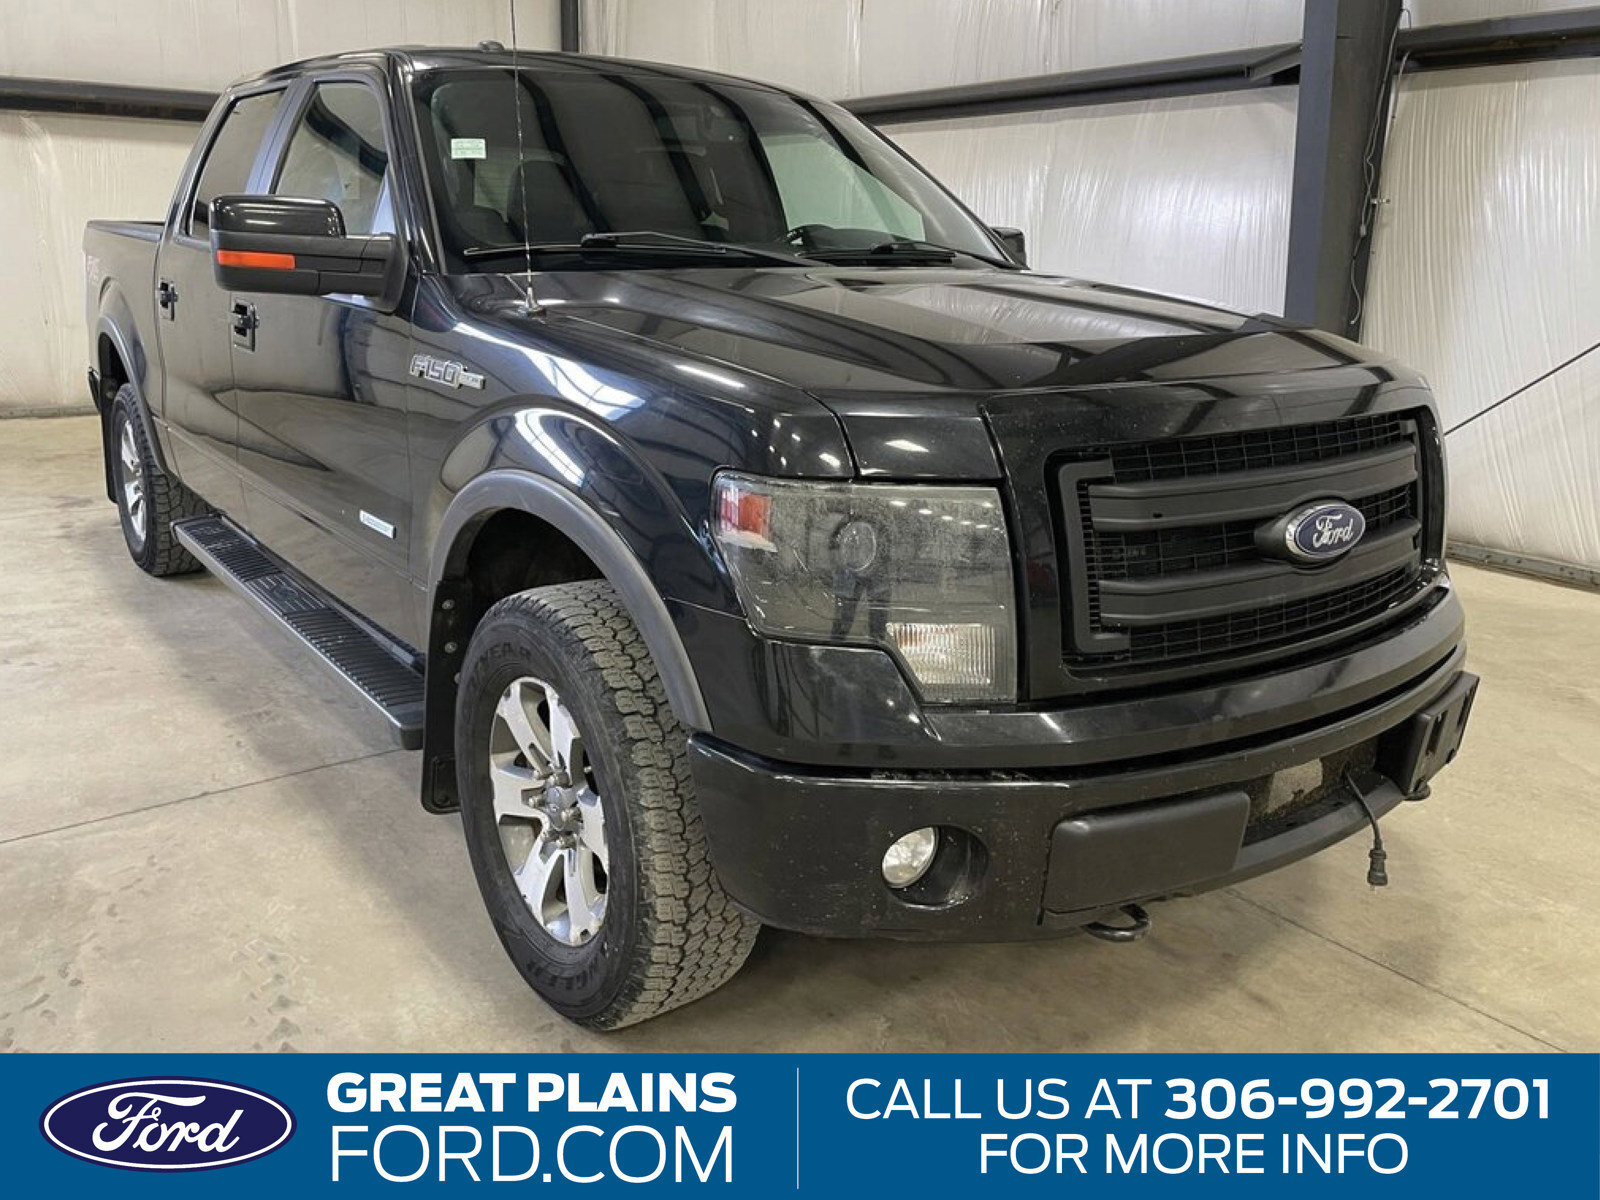 2014 Ford F-150 FX4 | 4x4 | Leather Heated Seats | Navigation | Ba